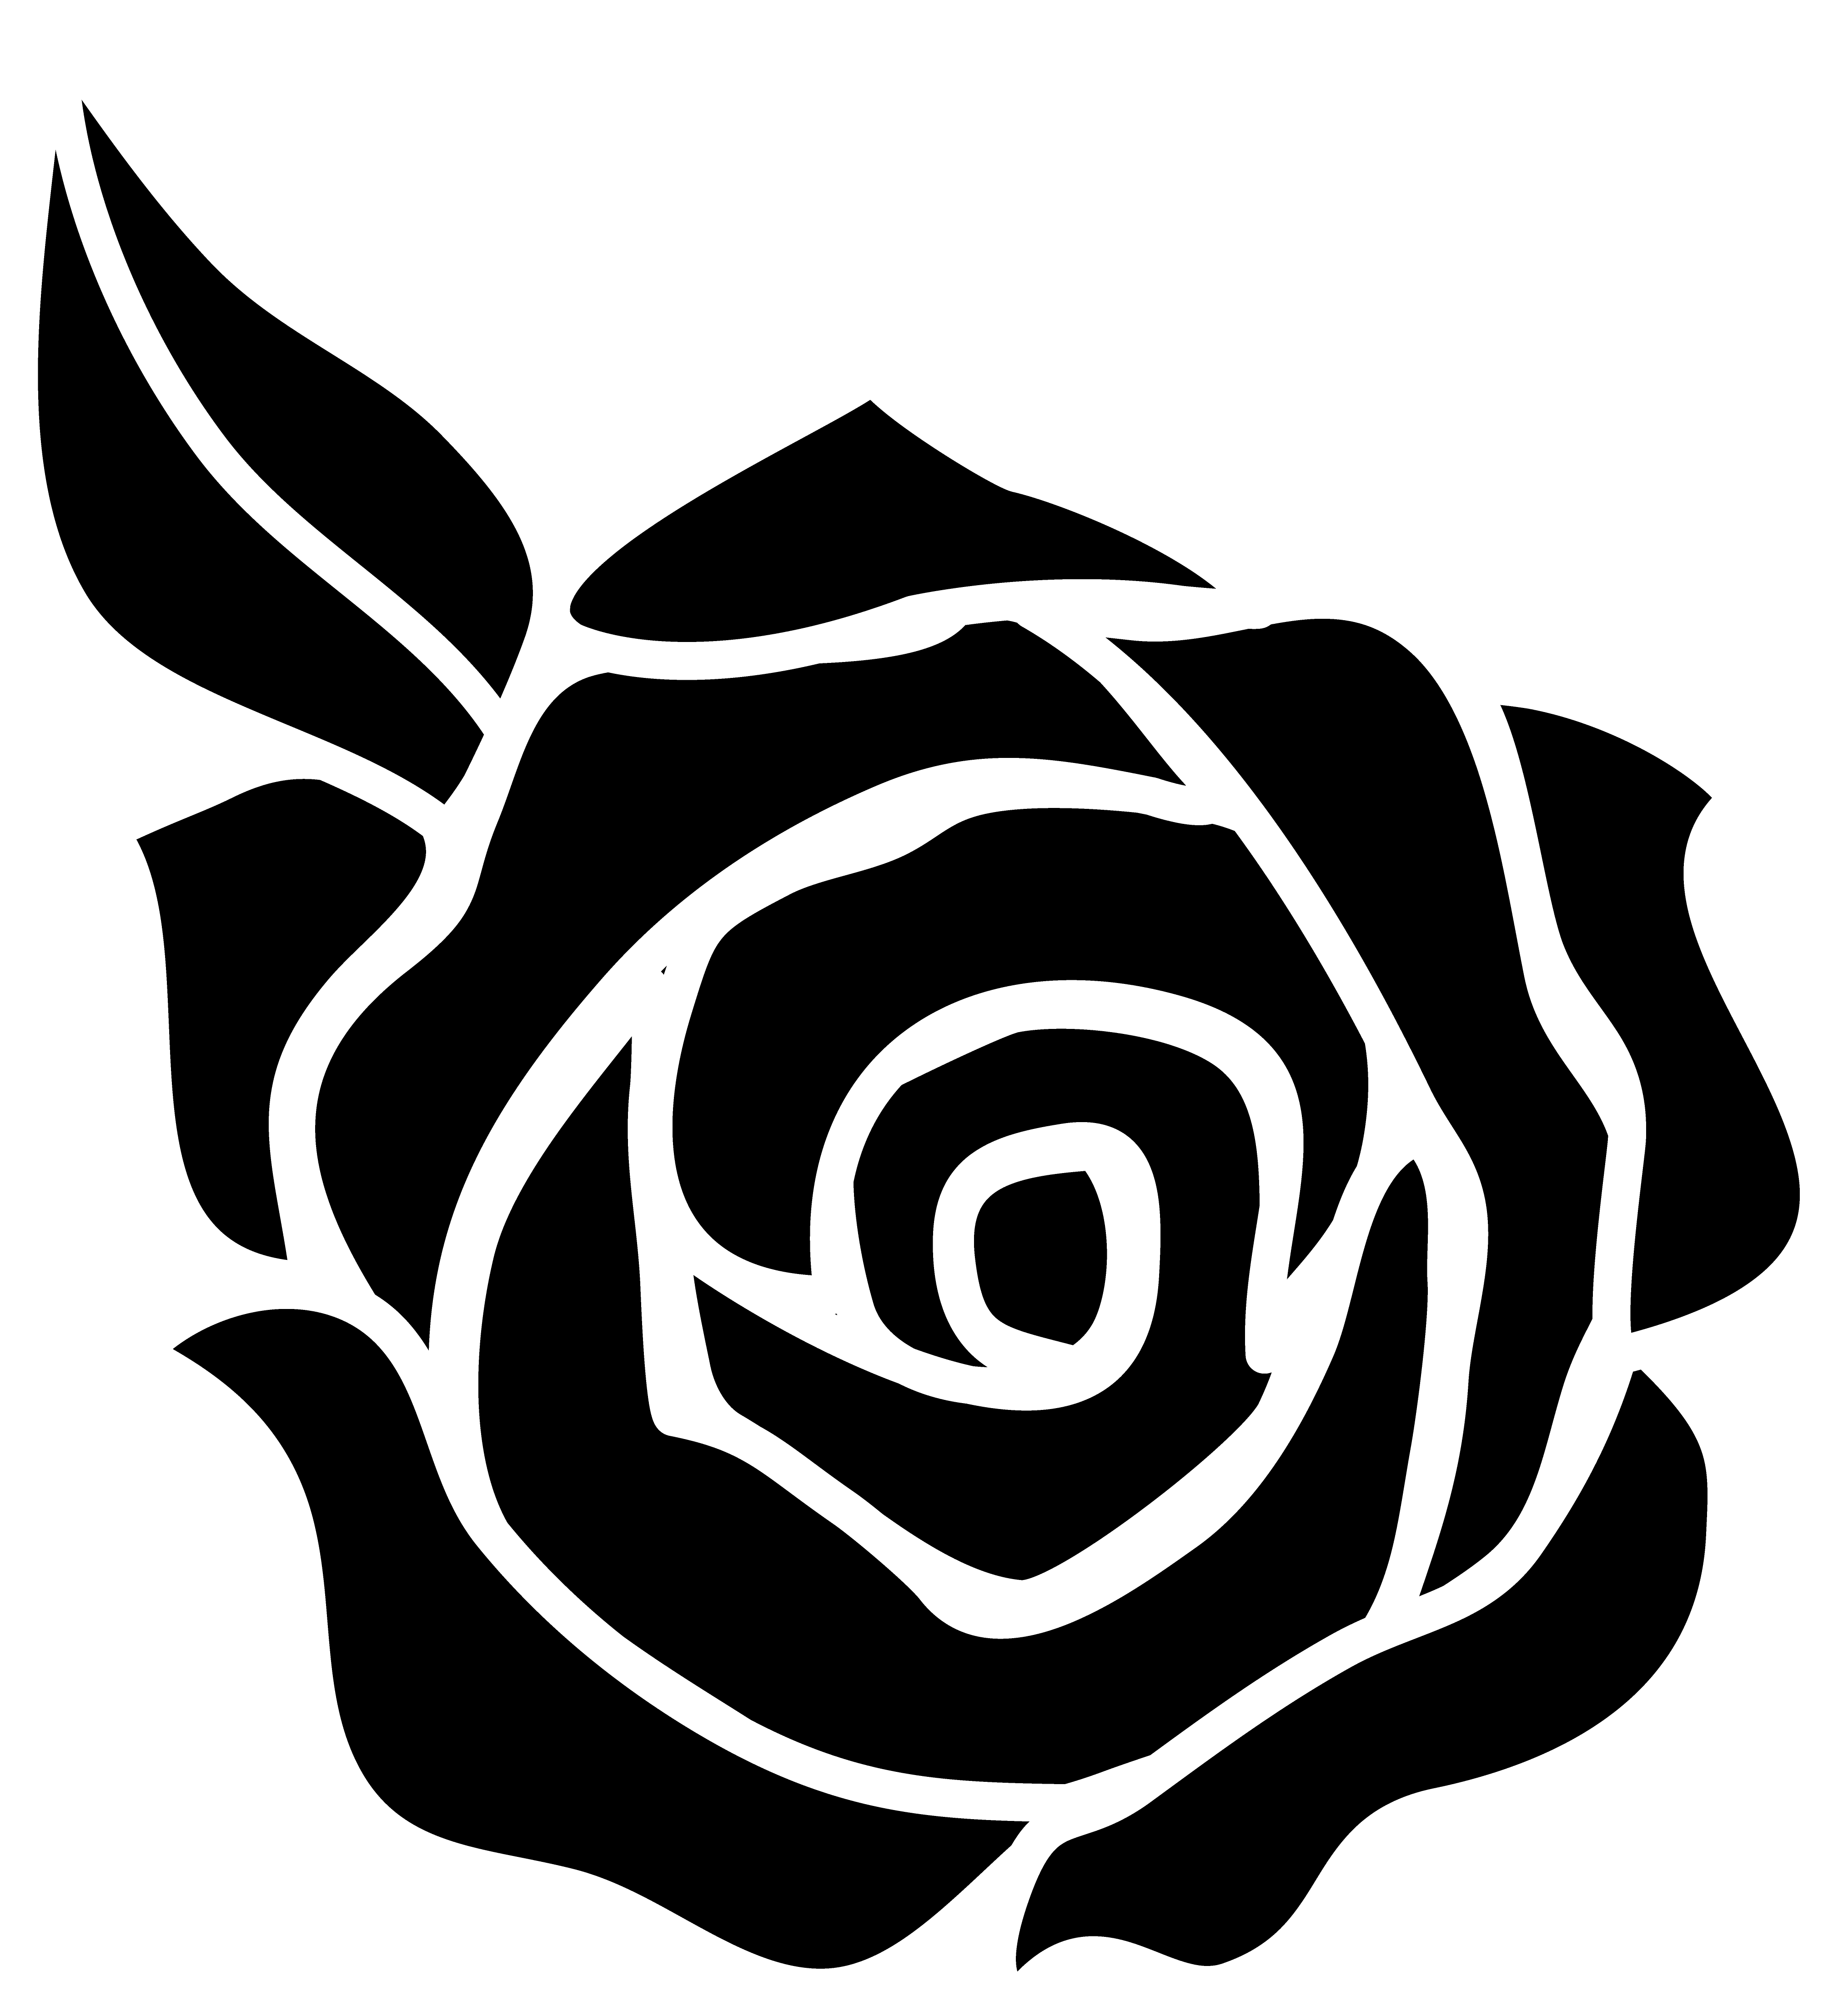 0 ideas about rose silhouette on silhouette black clipart